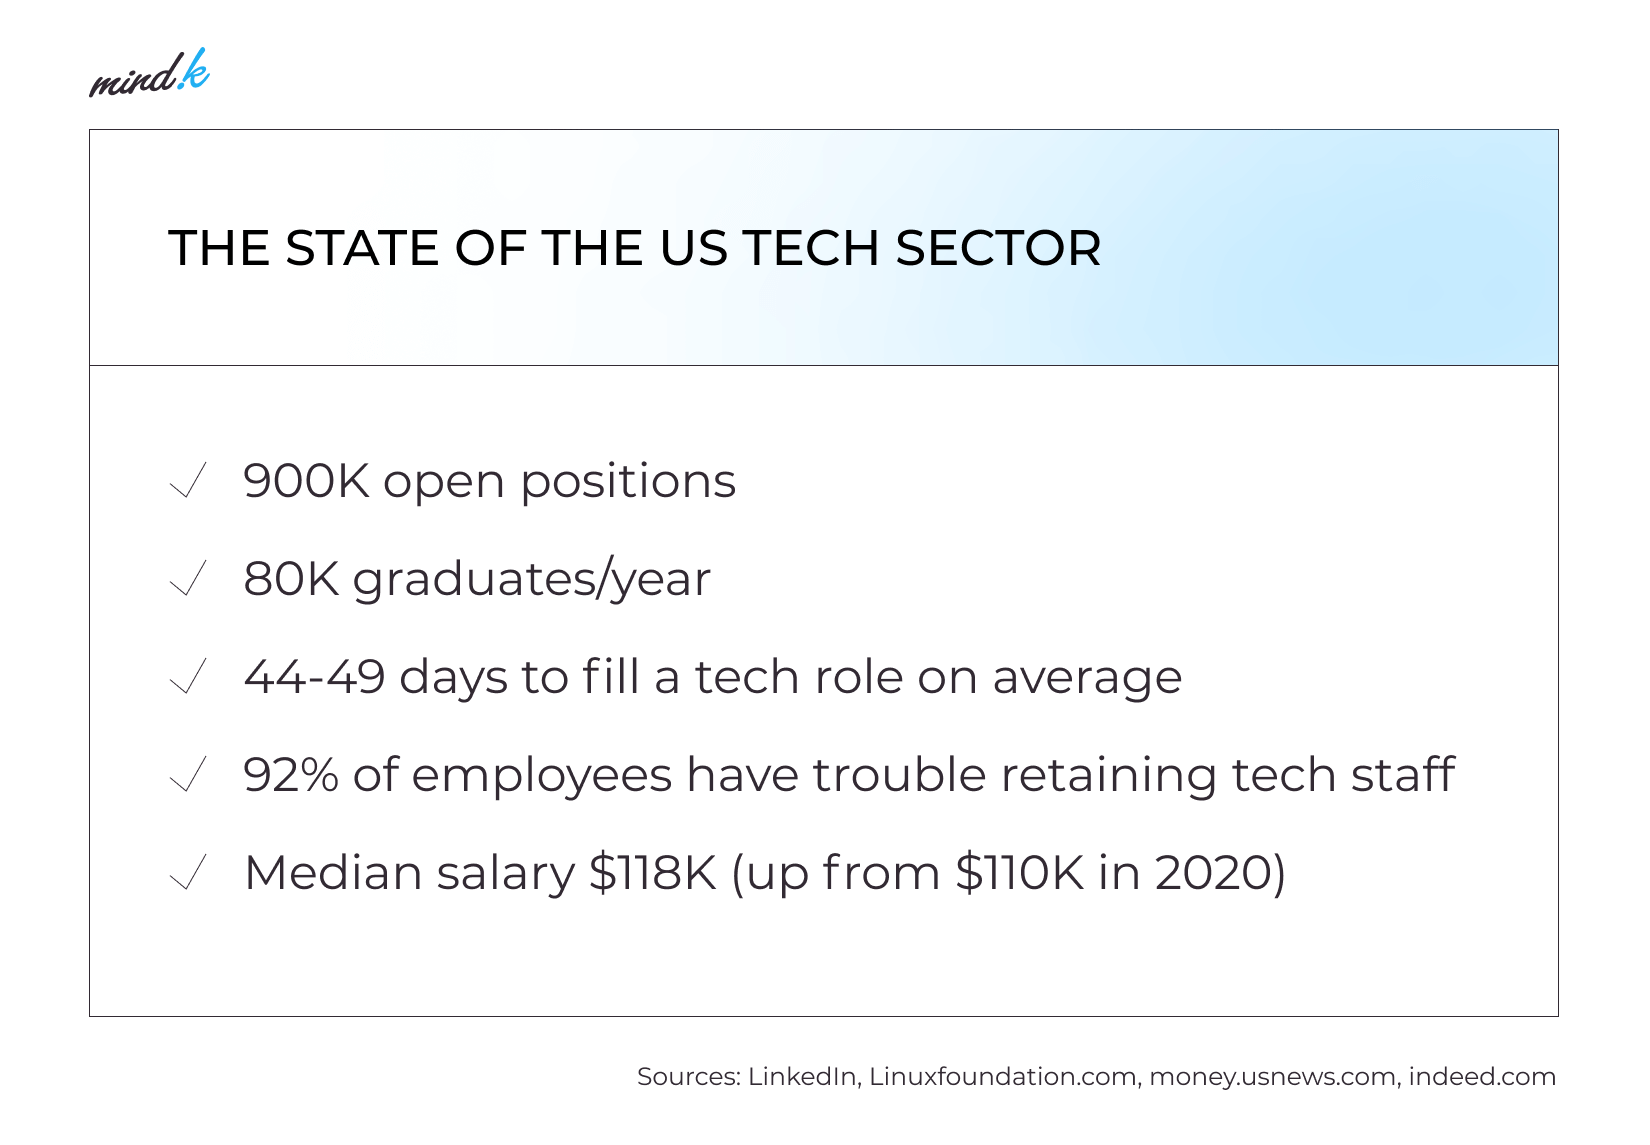 state of the US tech sector